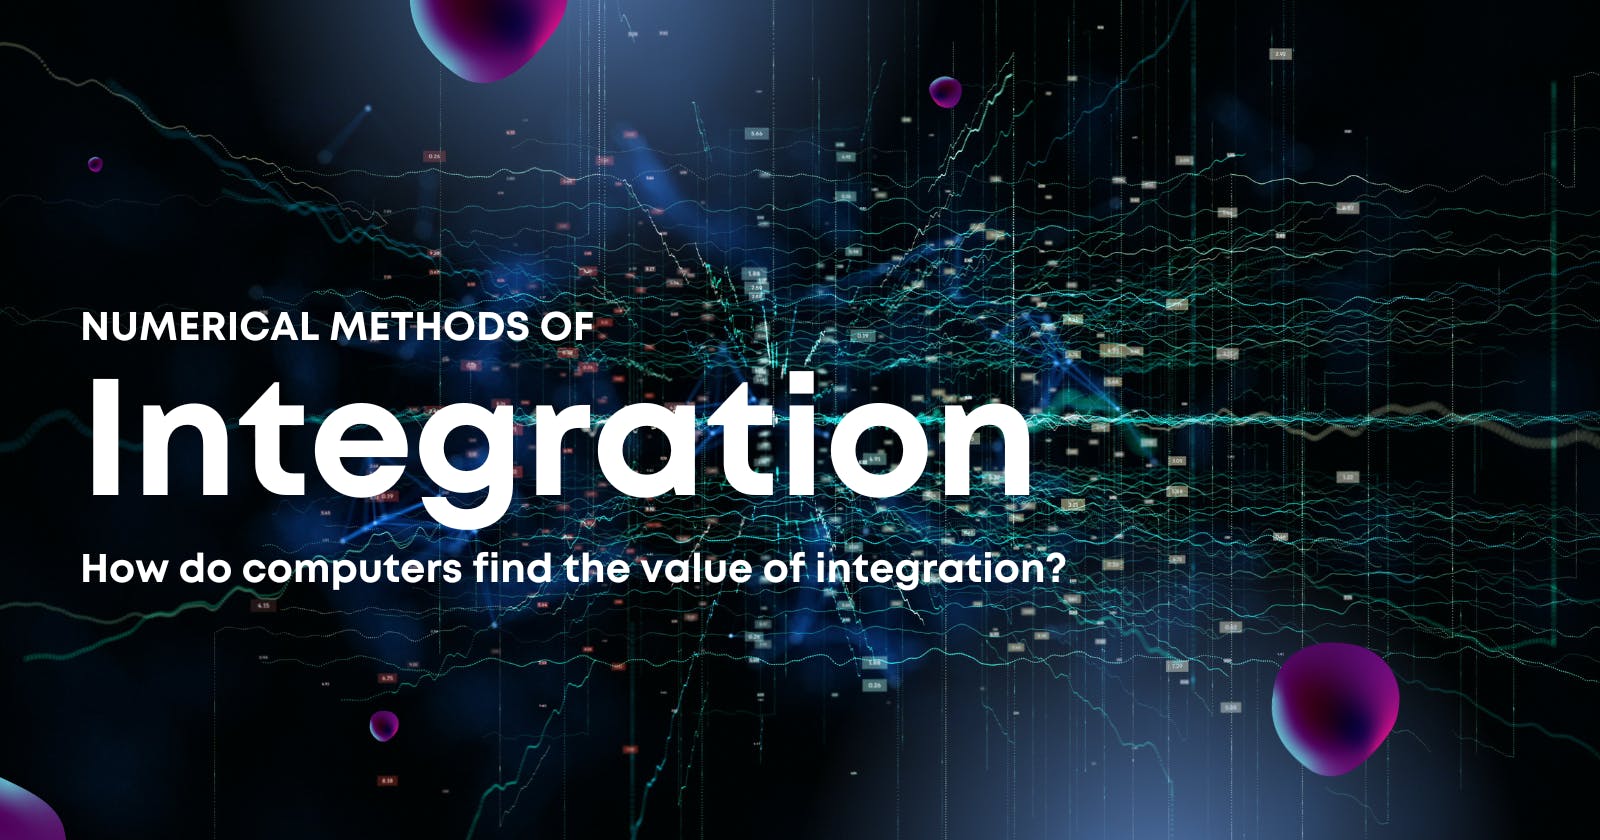 How do computers find the value of integration?